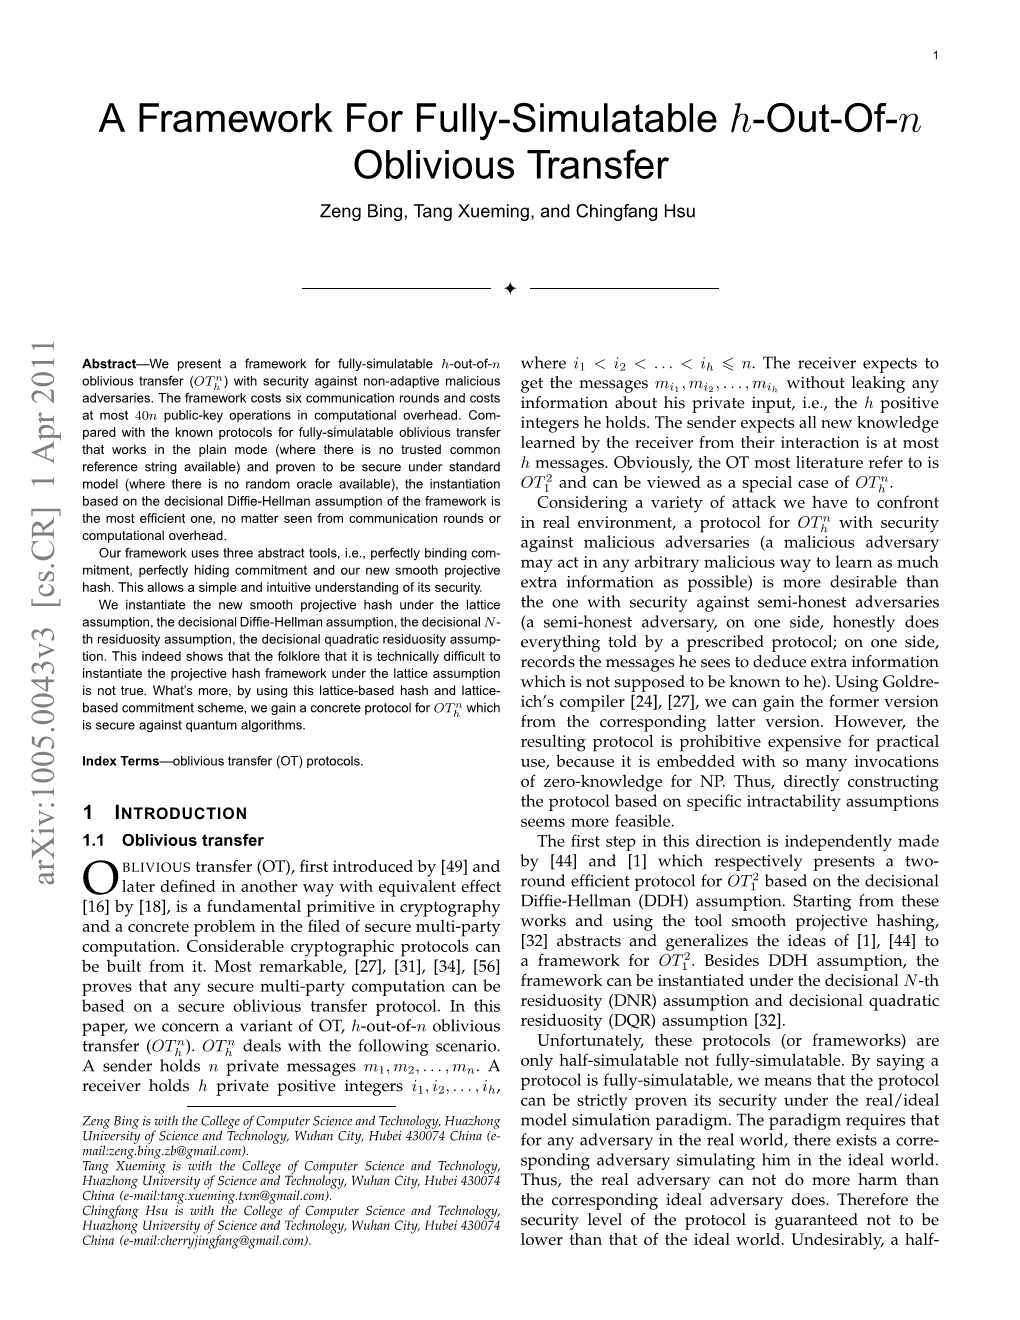 A Framework for Fully-Simulatable H-Out-Of-N Oblivious Transfer